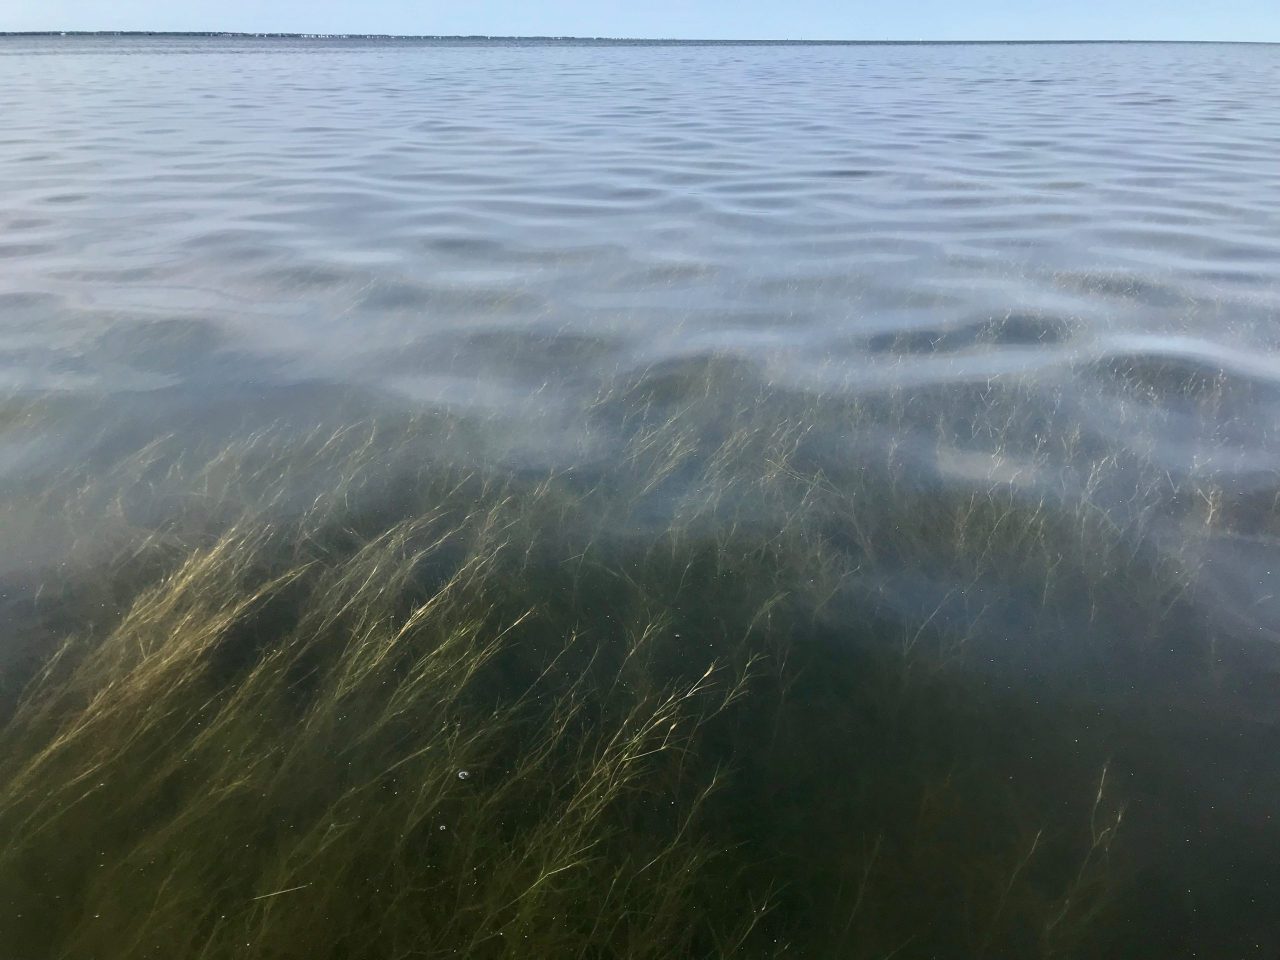 Seagrass beds can be found on the sound side of North Carolina's barrier islands. Photo: APNEP